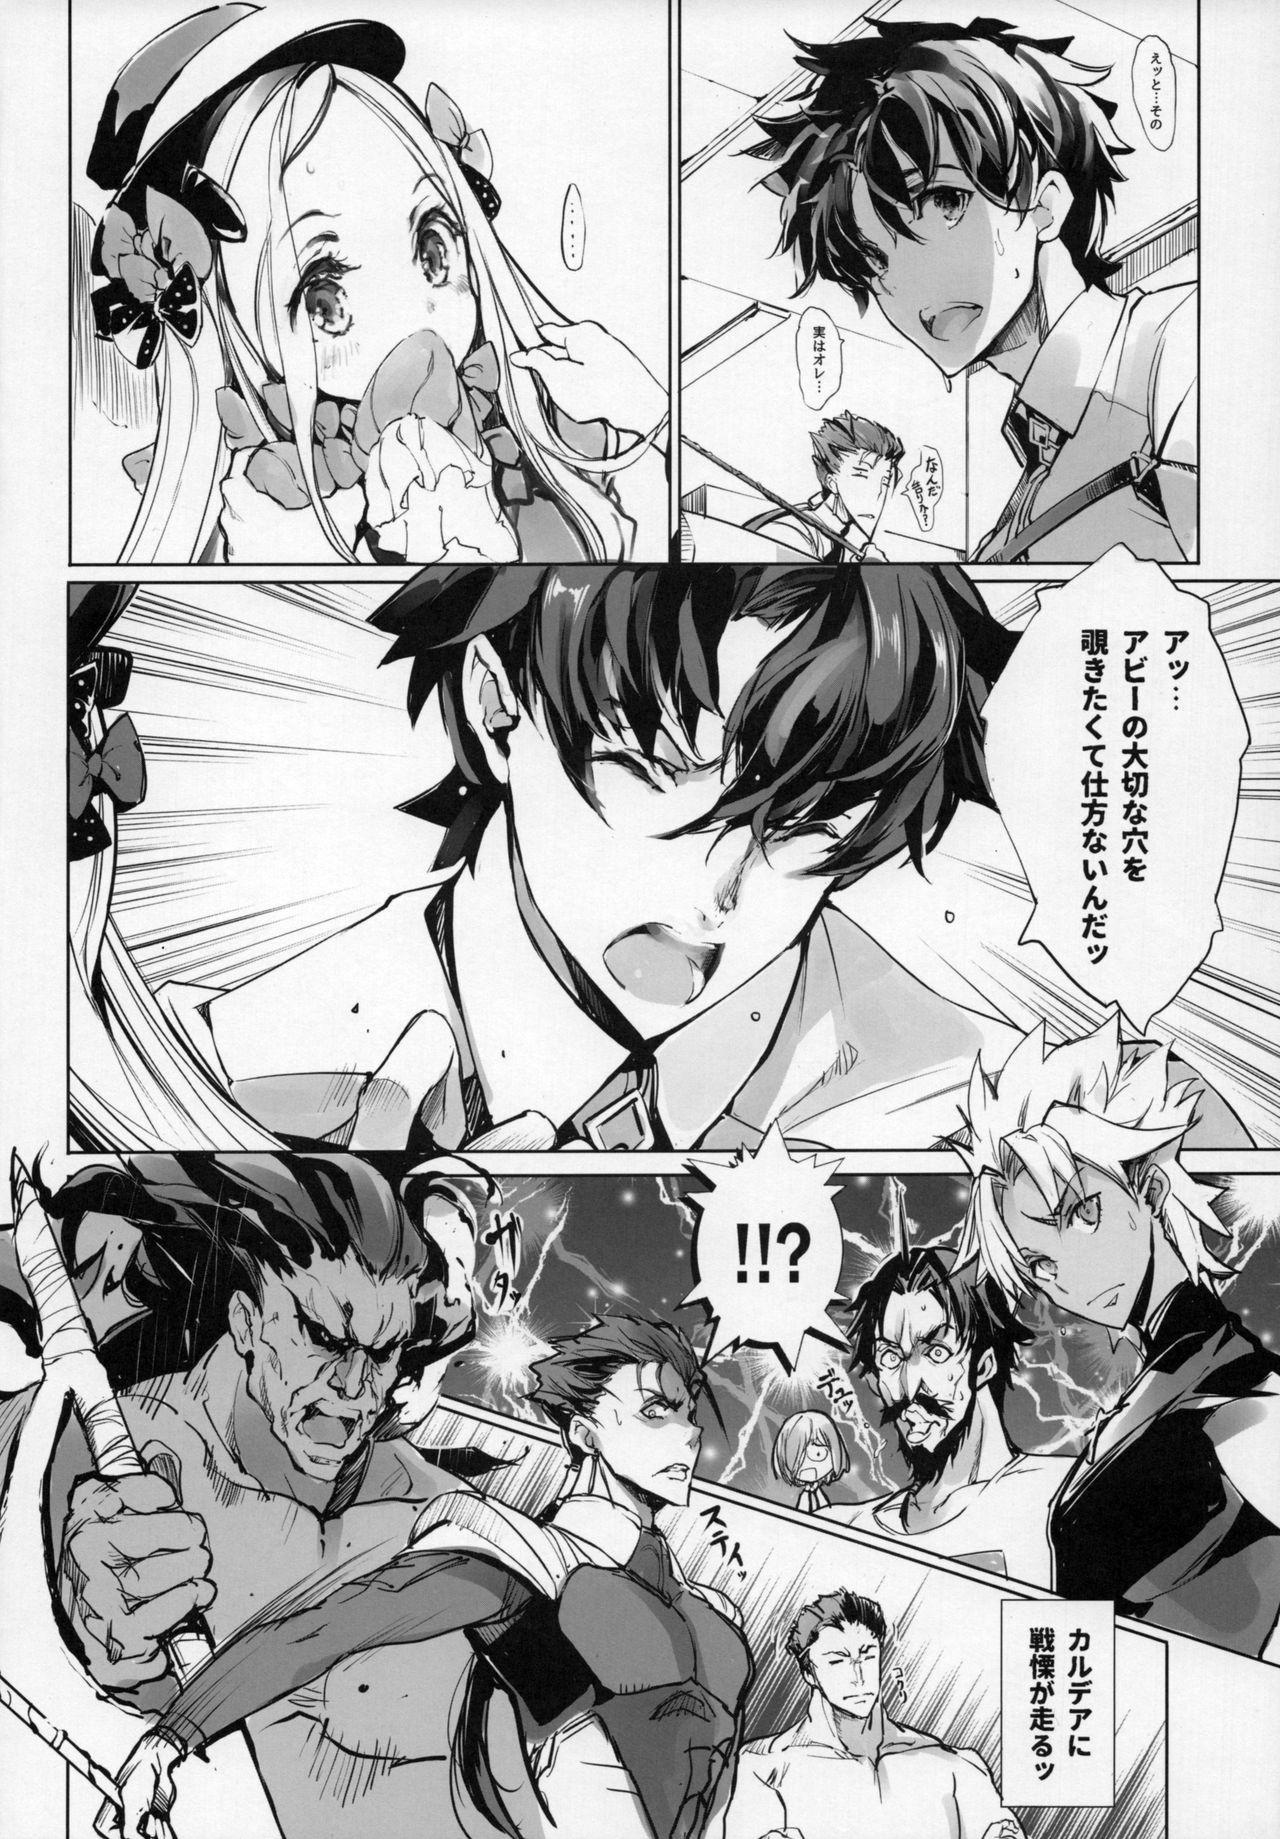 Spoon Sen no Ko o Haramu Mori no Shoujo - The girl of the woods with a thousand young - Fate grand order Shavedpussy - Page 7